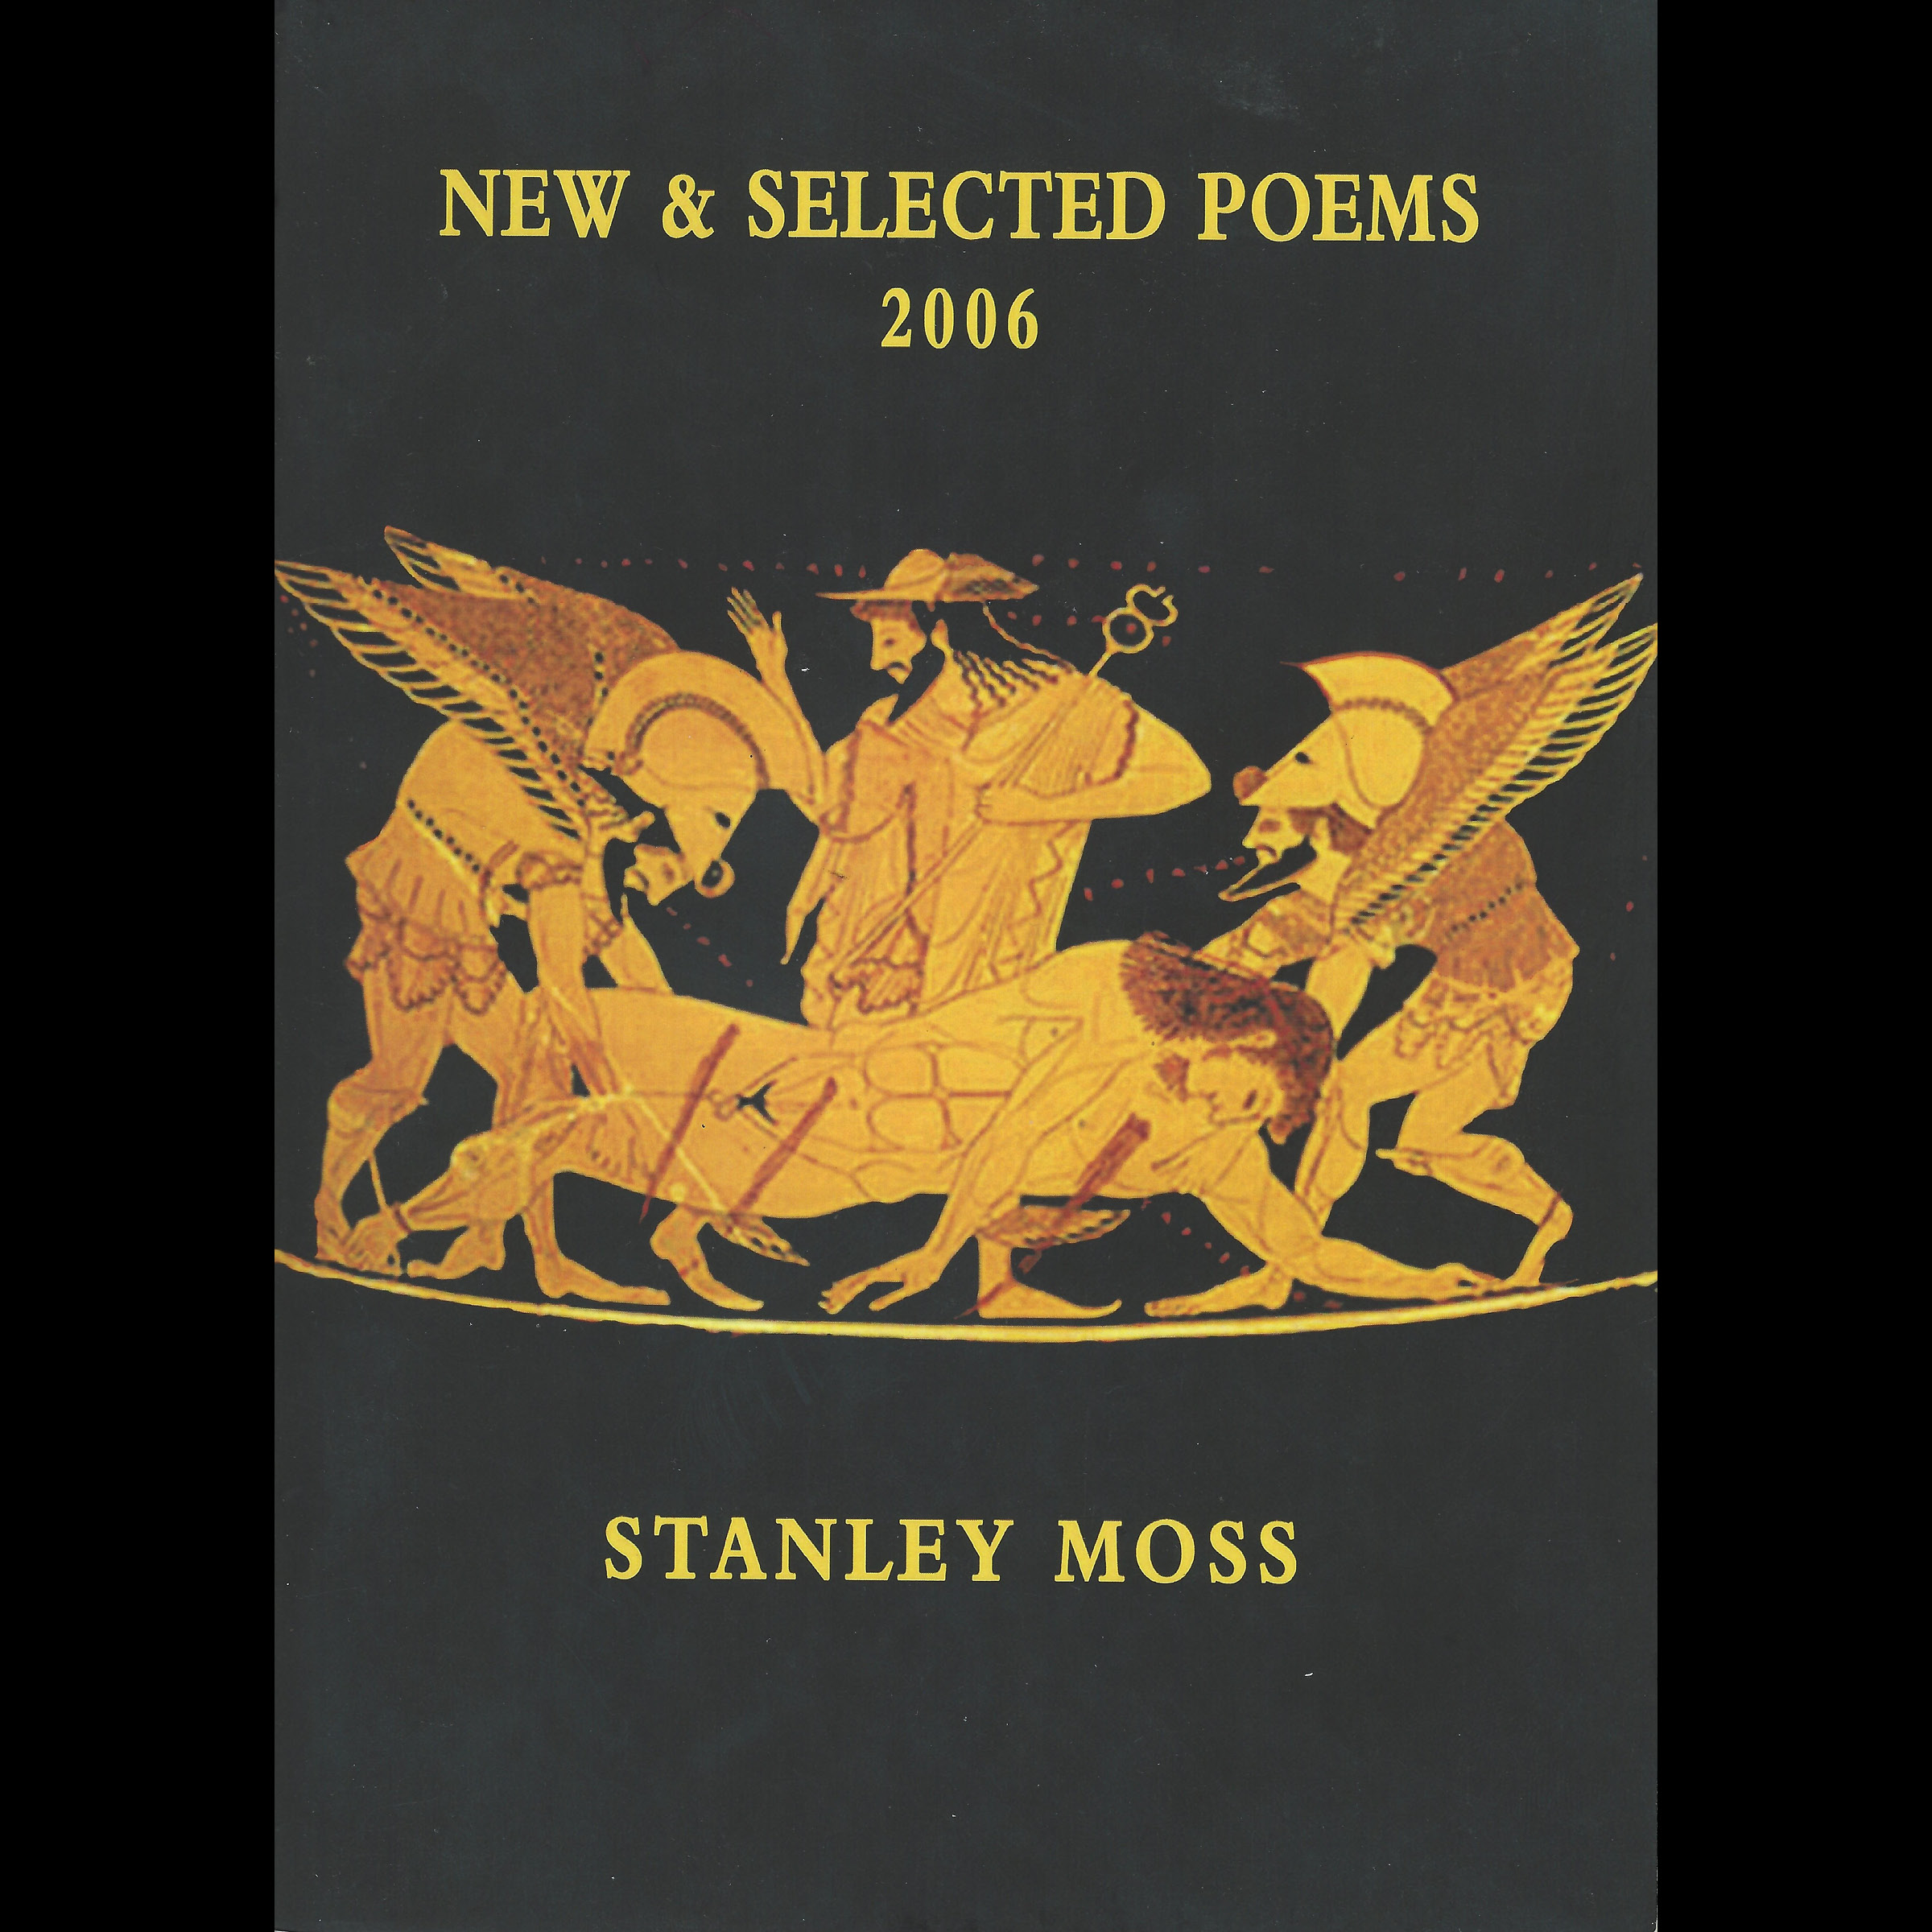 New and Selected Poems (Seven Stories, 2006)